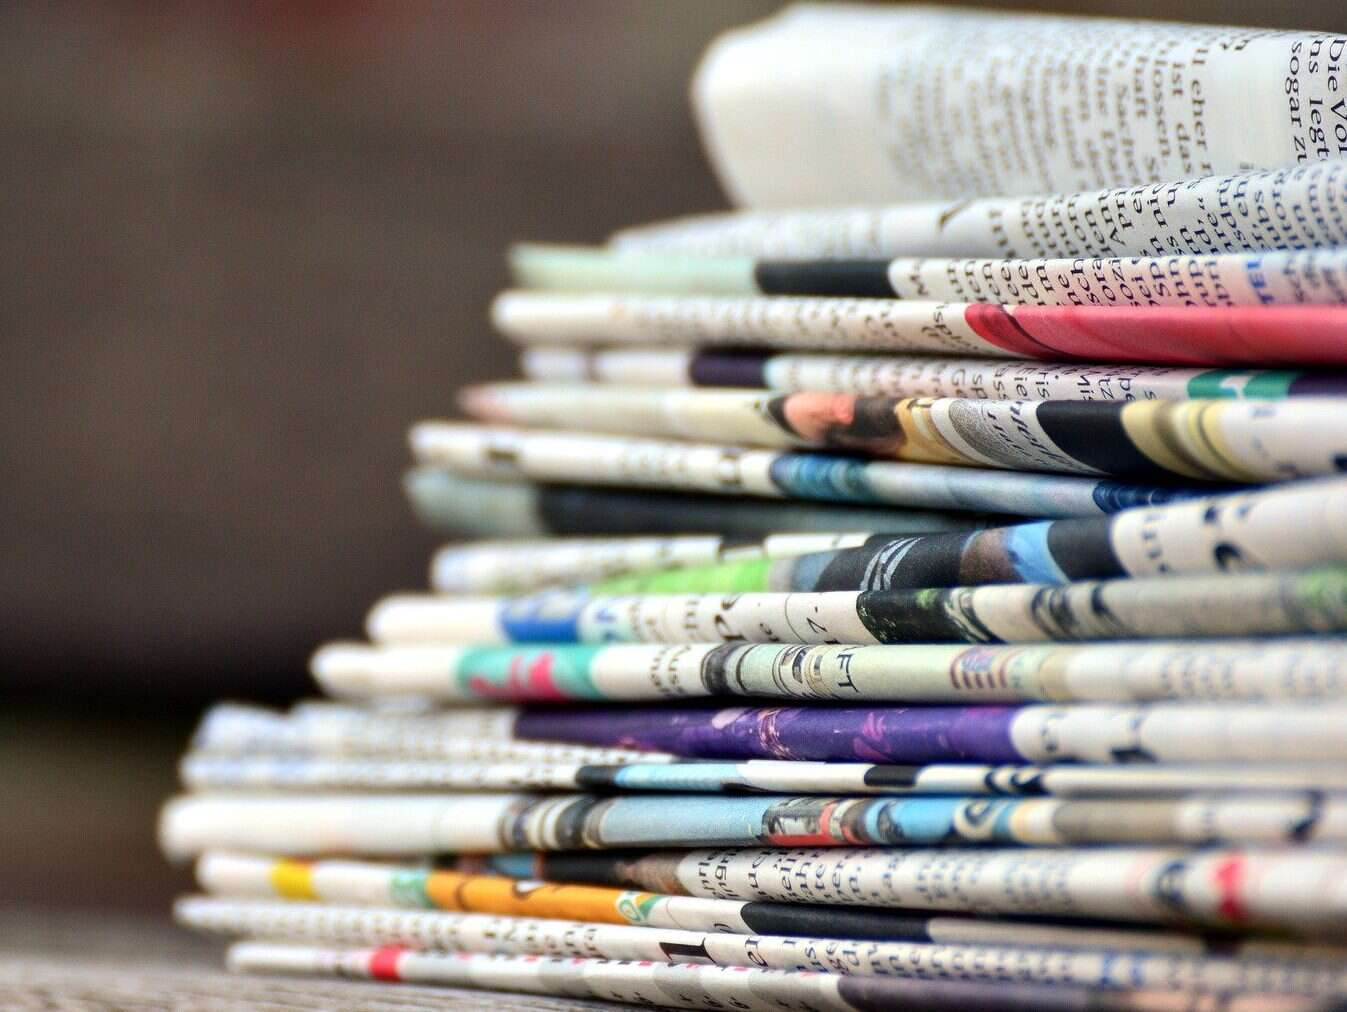 ABCs: Regional daily newspapers see average 18% circulation decline in a year